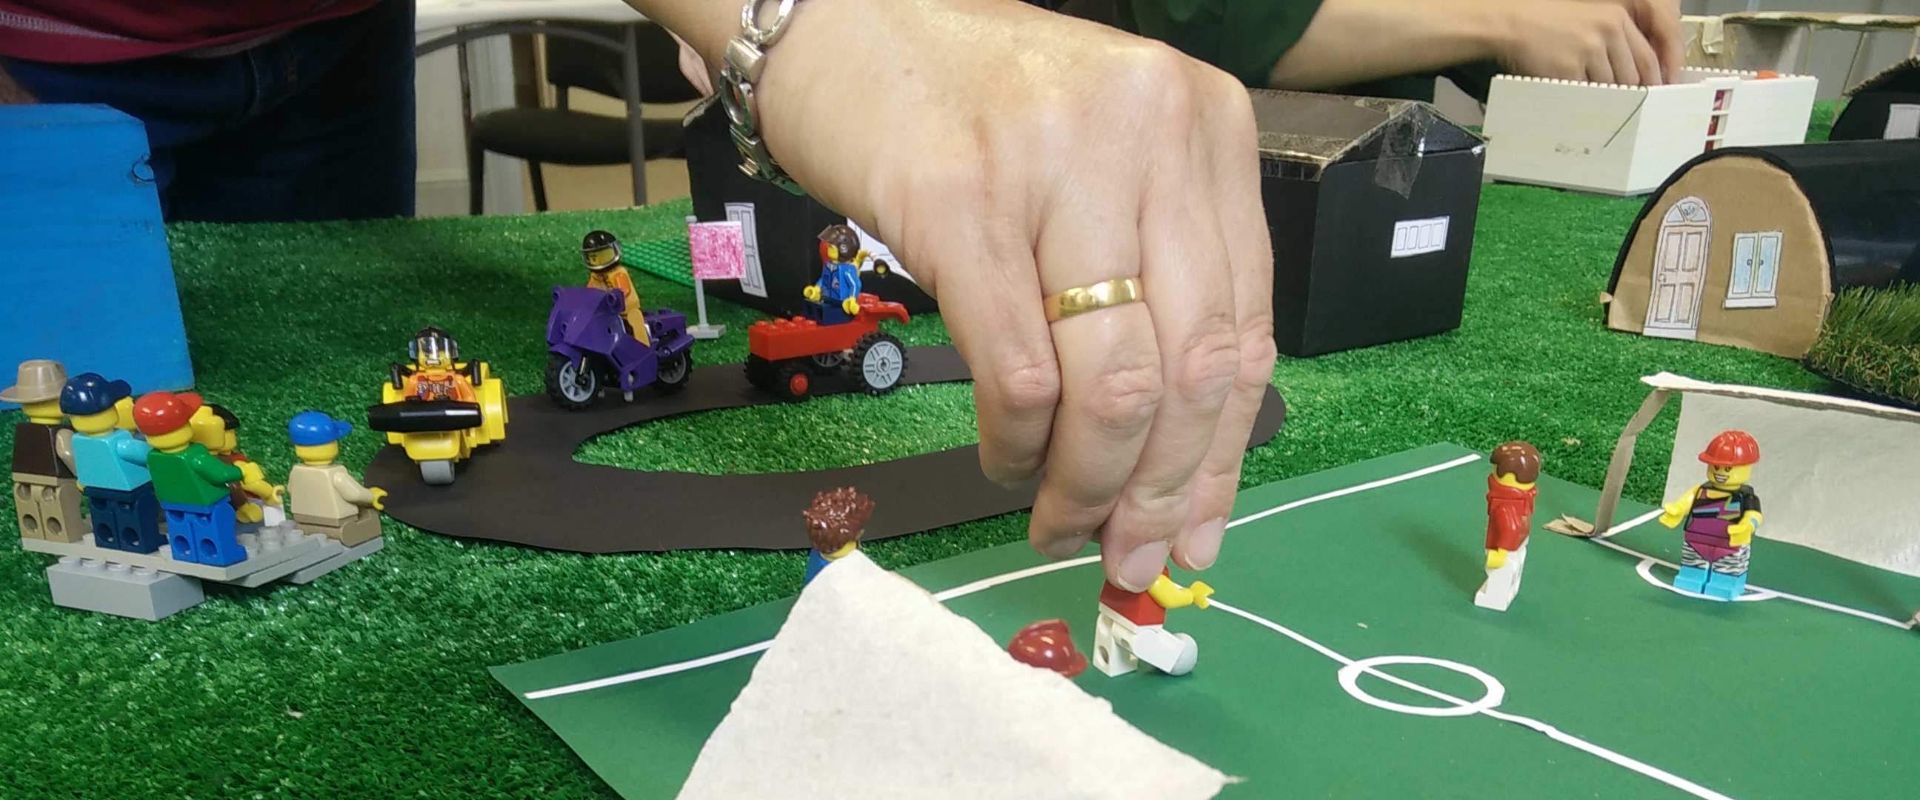 A hand readjusts a Lego figure on a homemade football pitch, the goalkeepers wearing hard hats. Lego speedway happens in the background.